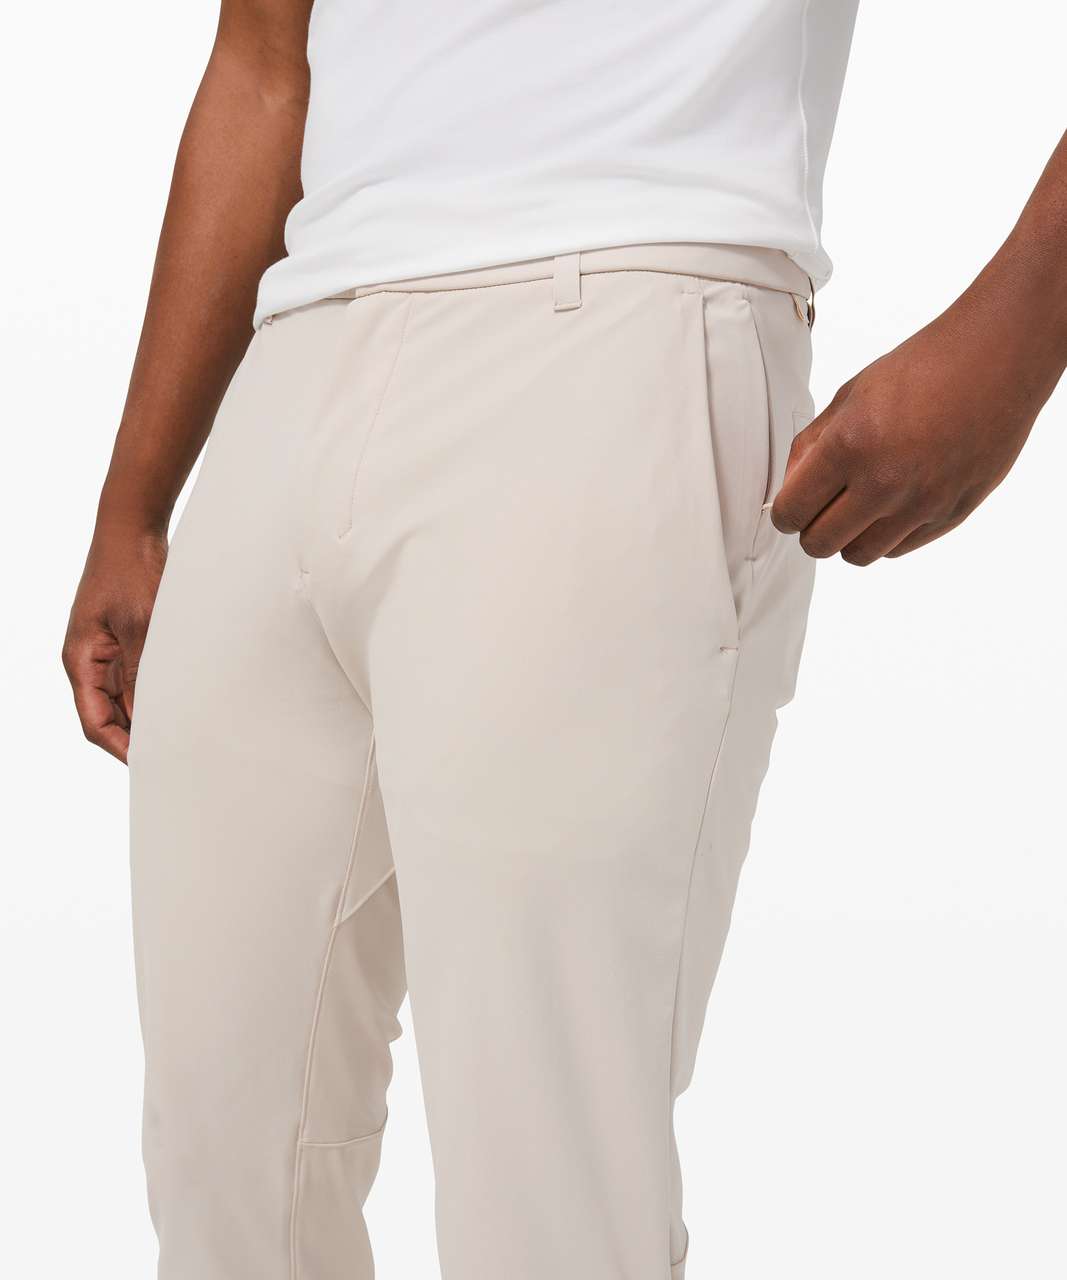 Lululemon Commission Pant Classic 32" *Warpstreme - Silverstone (First Release)